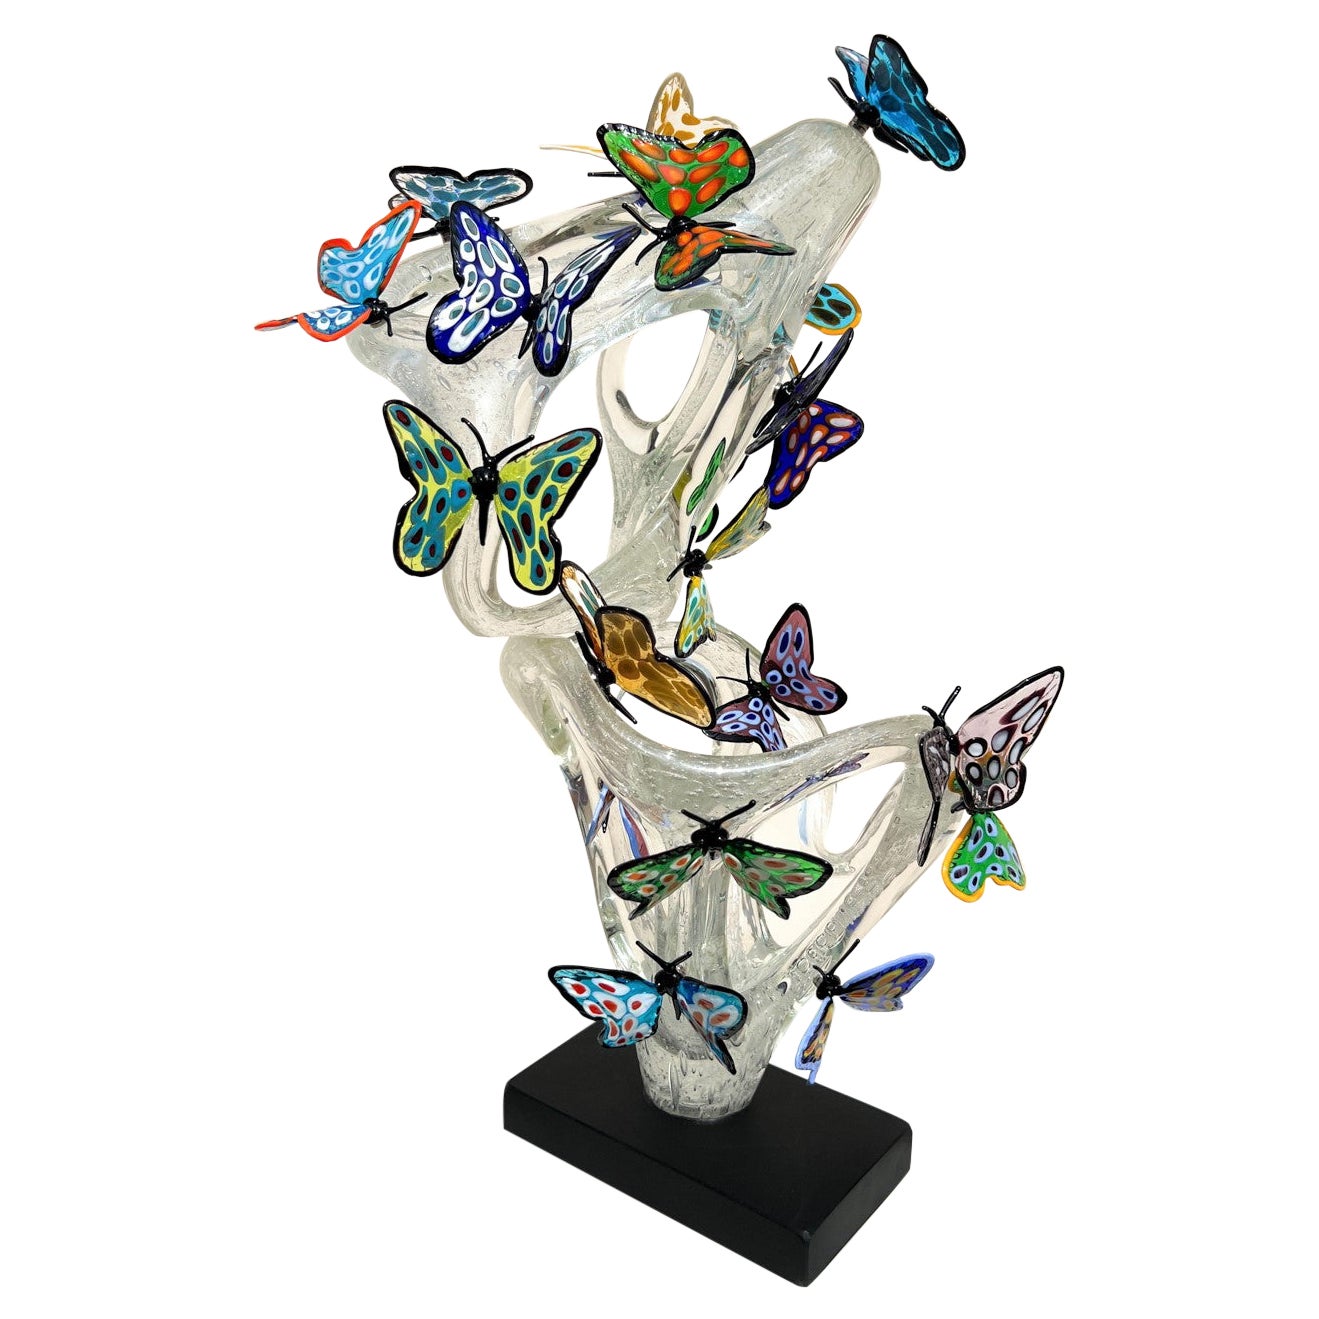 Costantini Diego Modern Crystal Murano Glass Infinity Sculpture With Butterflies For Sale